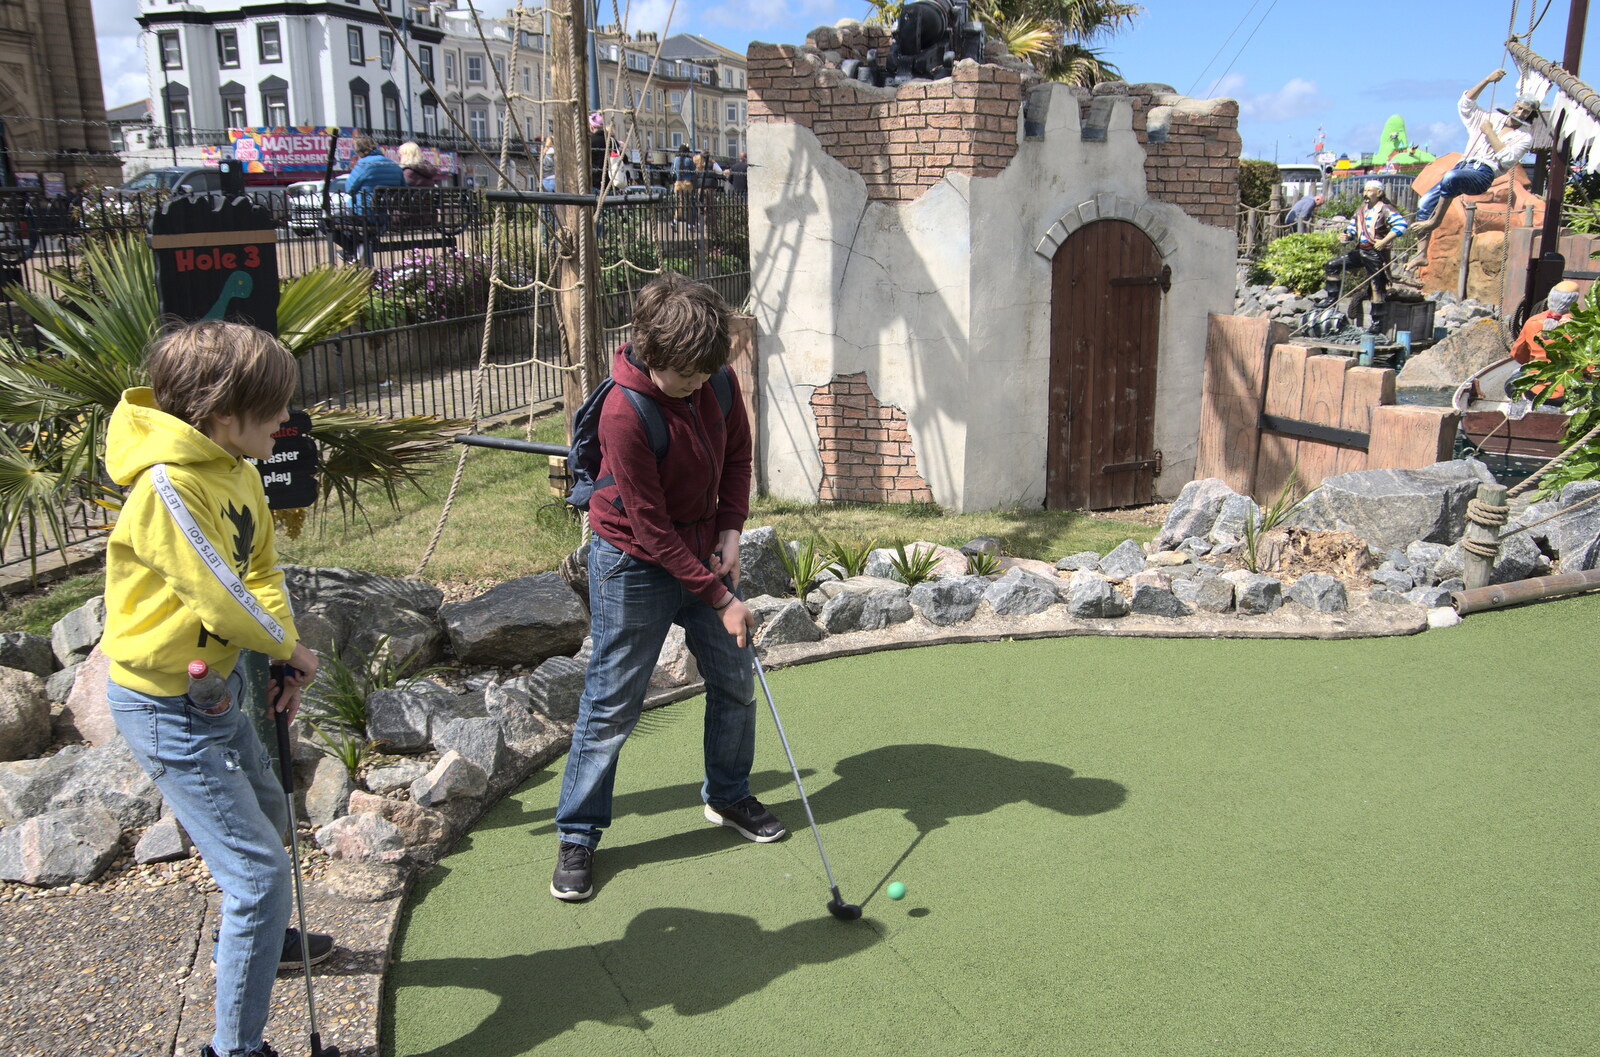 Fred lines up at crazy golf from Faded Seaside Glamour: A Weekend in Great Yarmouth, Norfolk - 29th May 2022